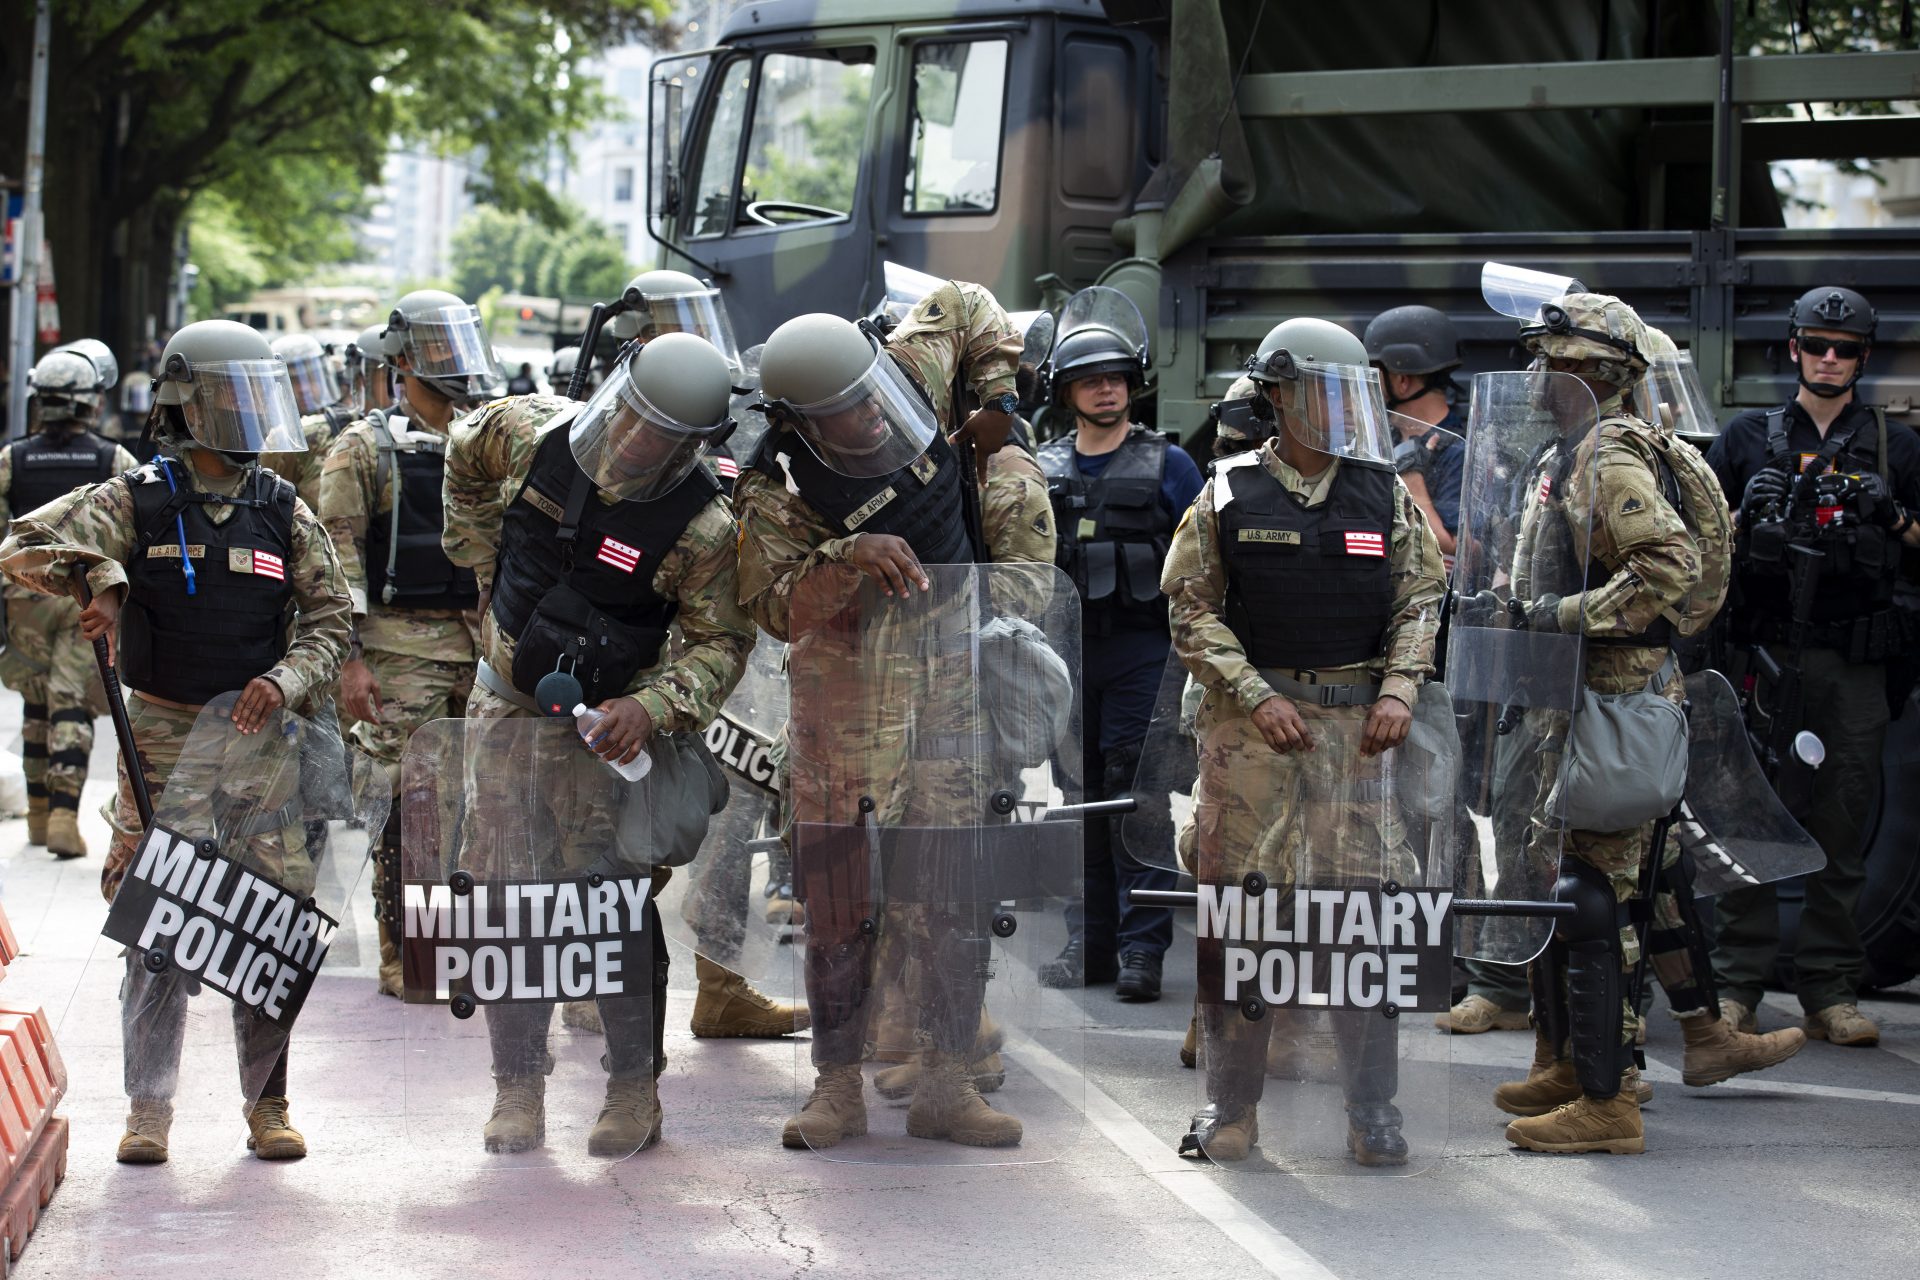 Military police secure a perimeter near to the White House, Wednesday, June 3, 2020 in Washington, during a protest over the death of George Floyd, an unarmed black man, who died after a police officer kneeled on his neck for several minutes.